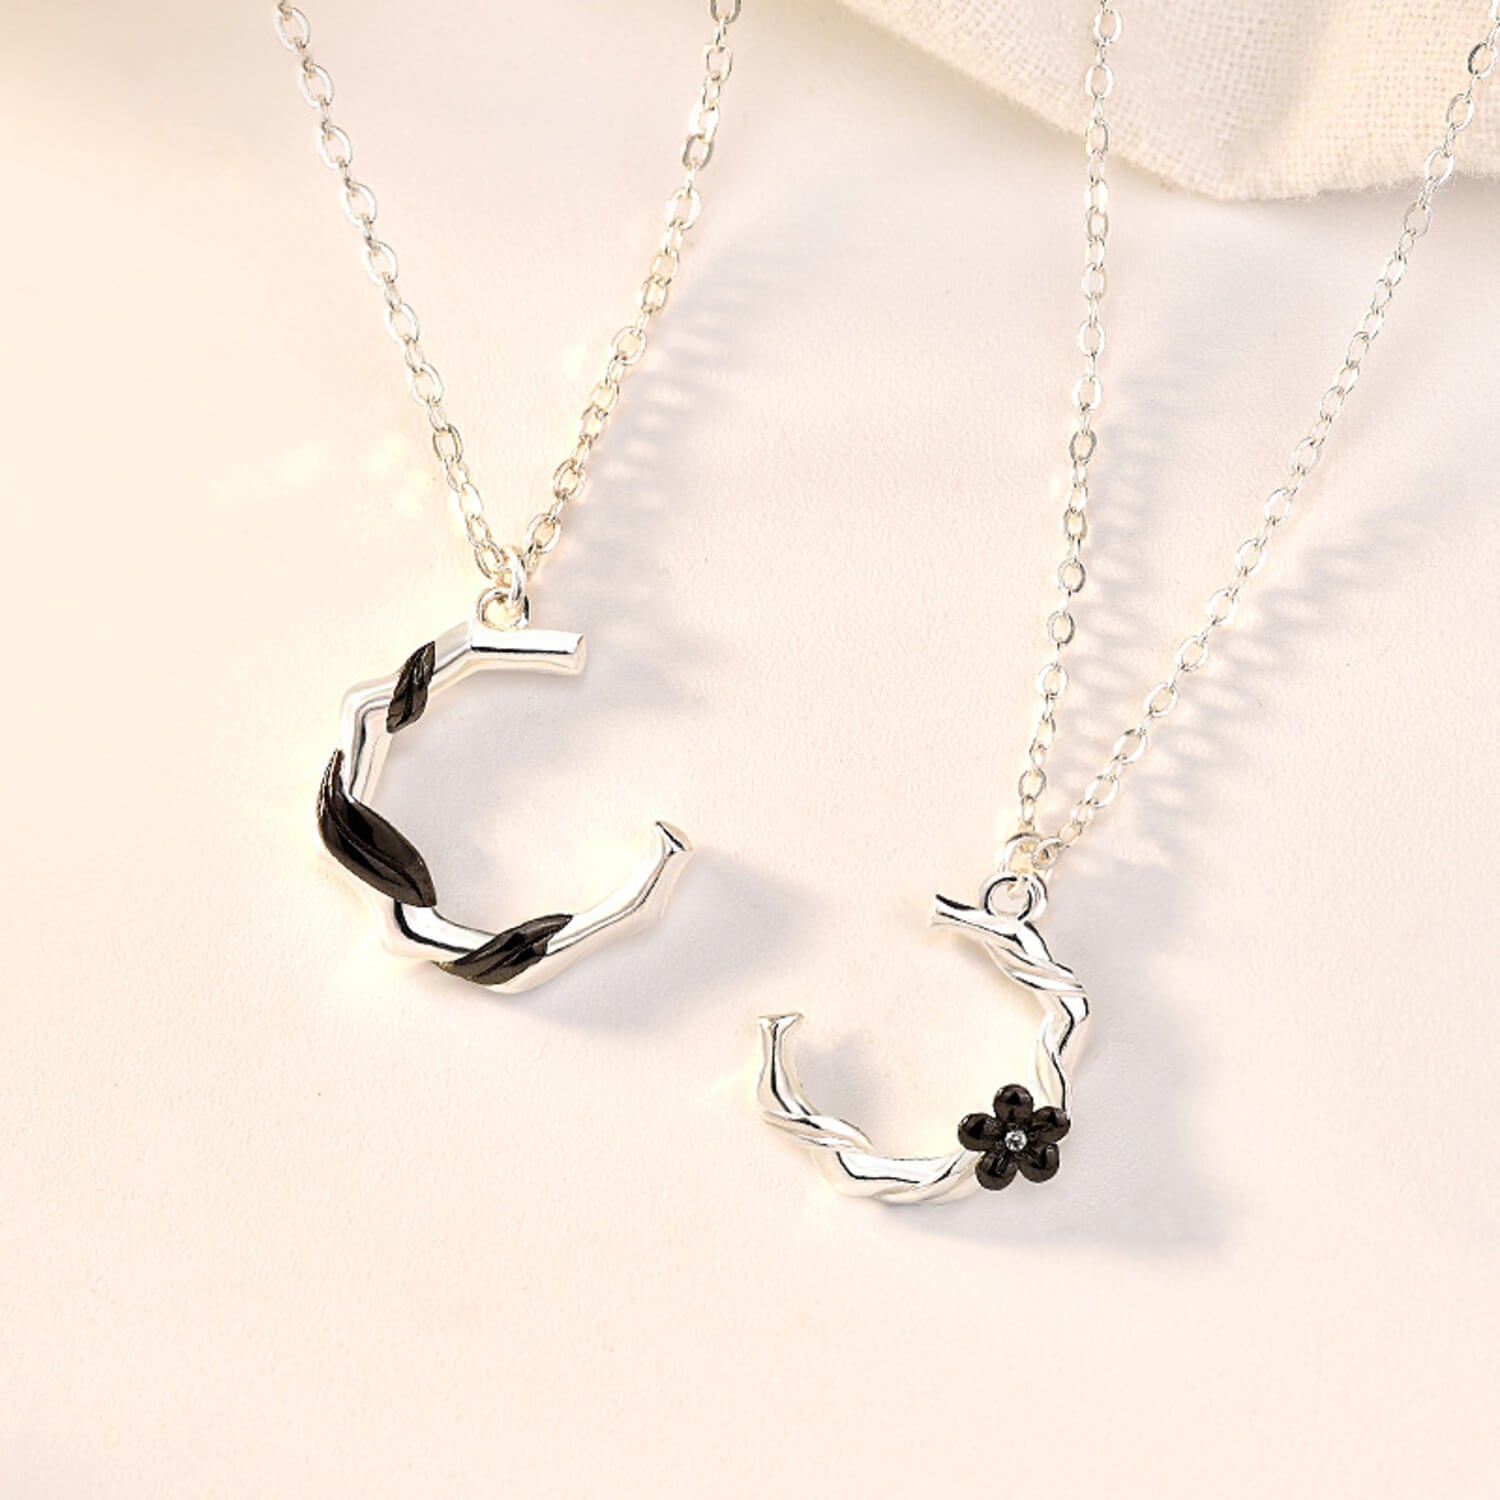 matching necklaces silver